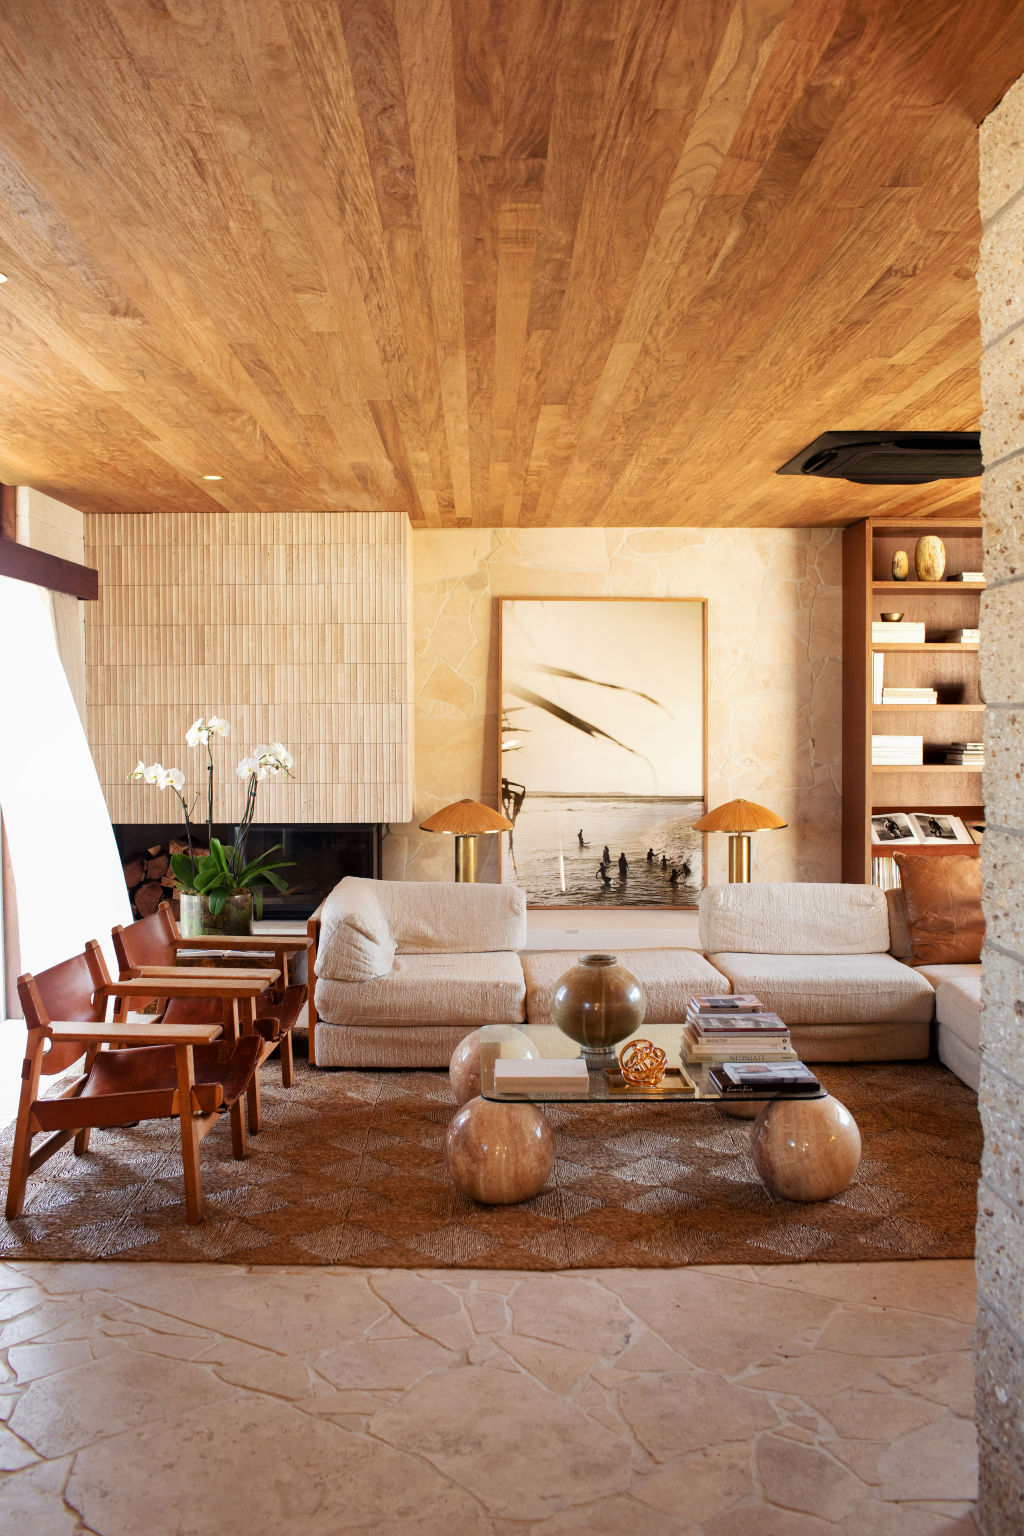 Photographer, stylist and author Kara Rosenlund started with this house completely untouched. Photo: Kara Rosenlund